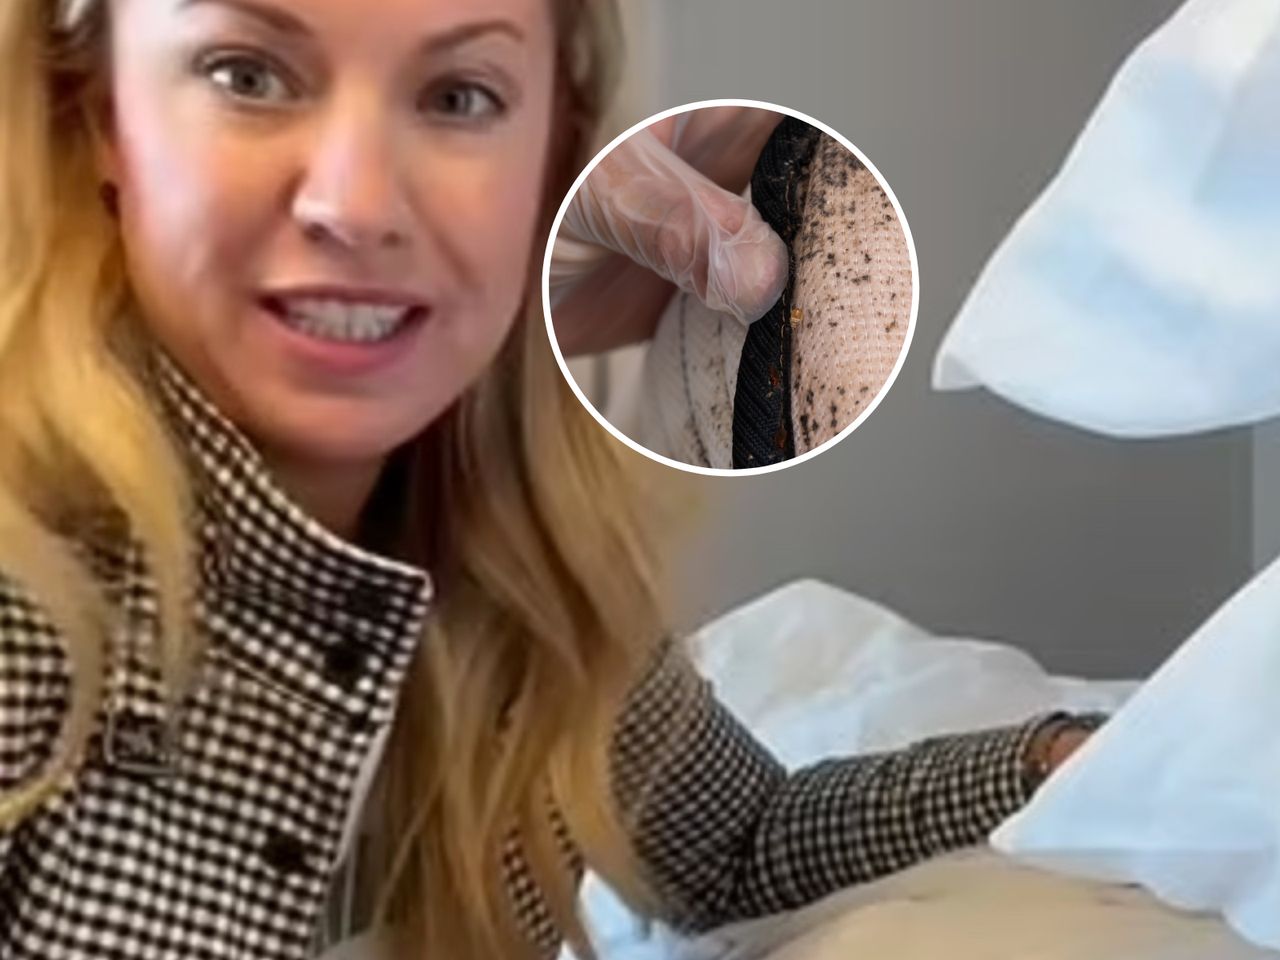 Entomologist shares foolproof tips on TikTok to detect bedbugs in your hotel room